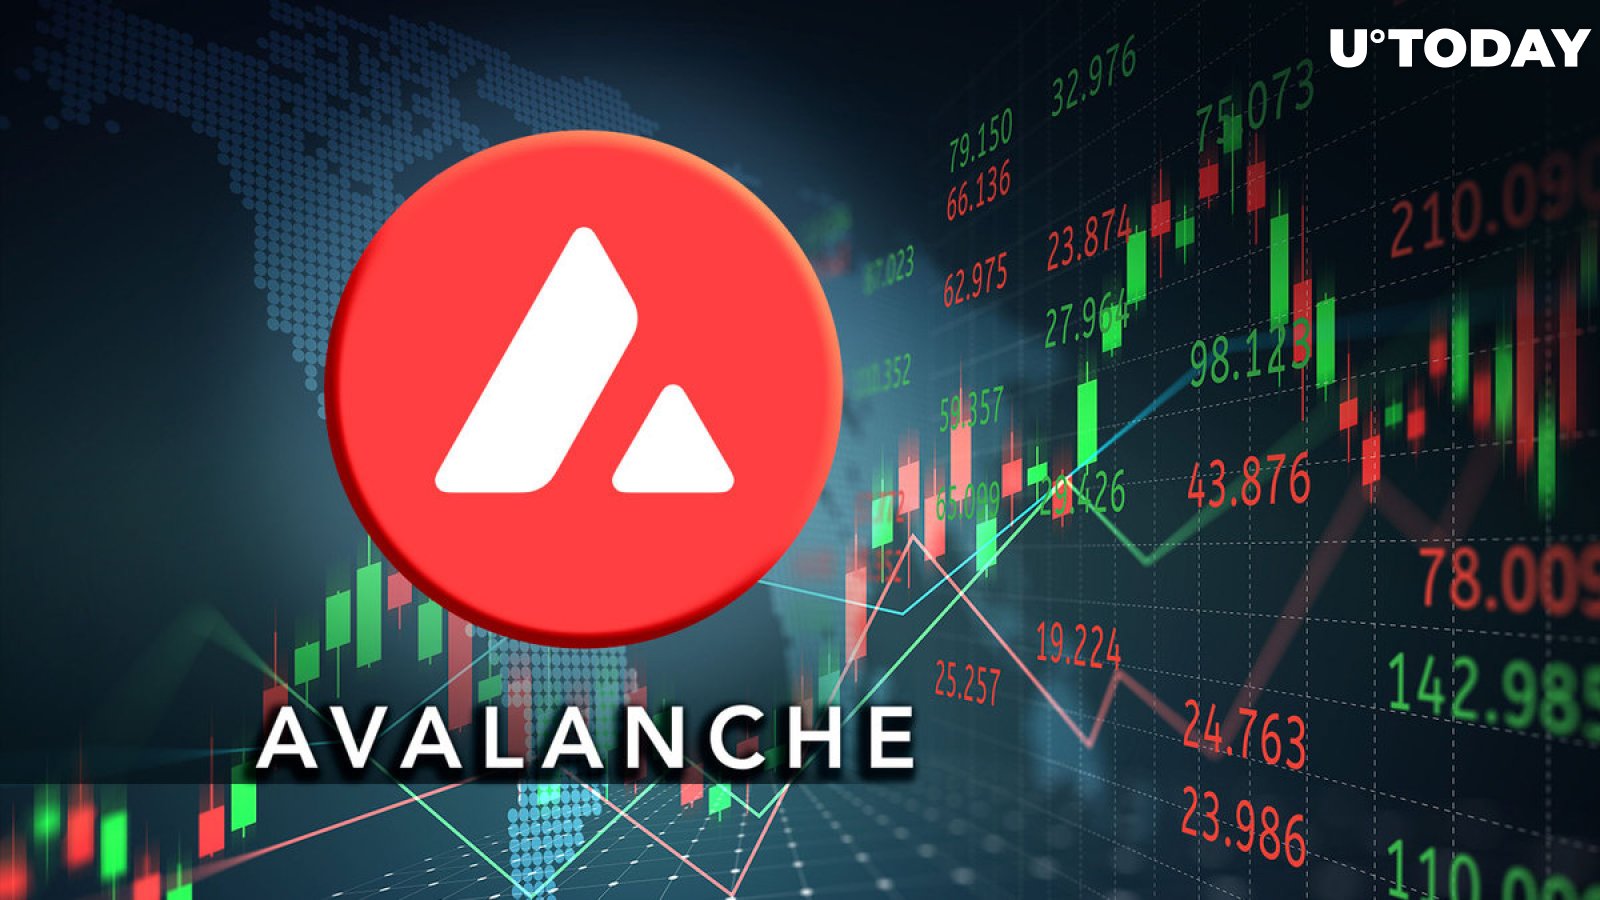 Avalanche (AVAX) Enters Top 10 After 105% Growth Sprint